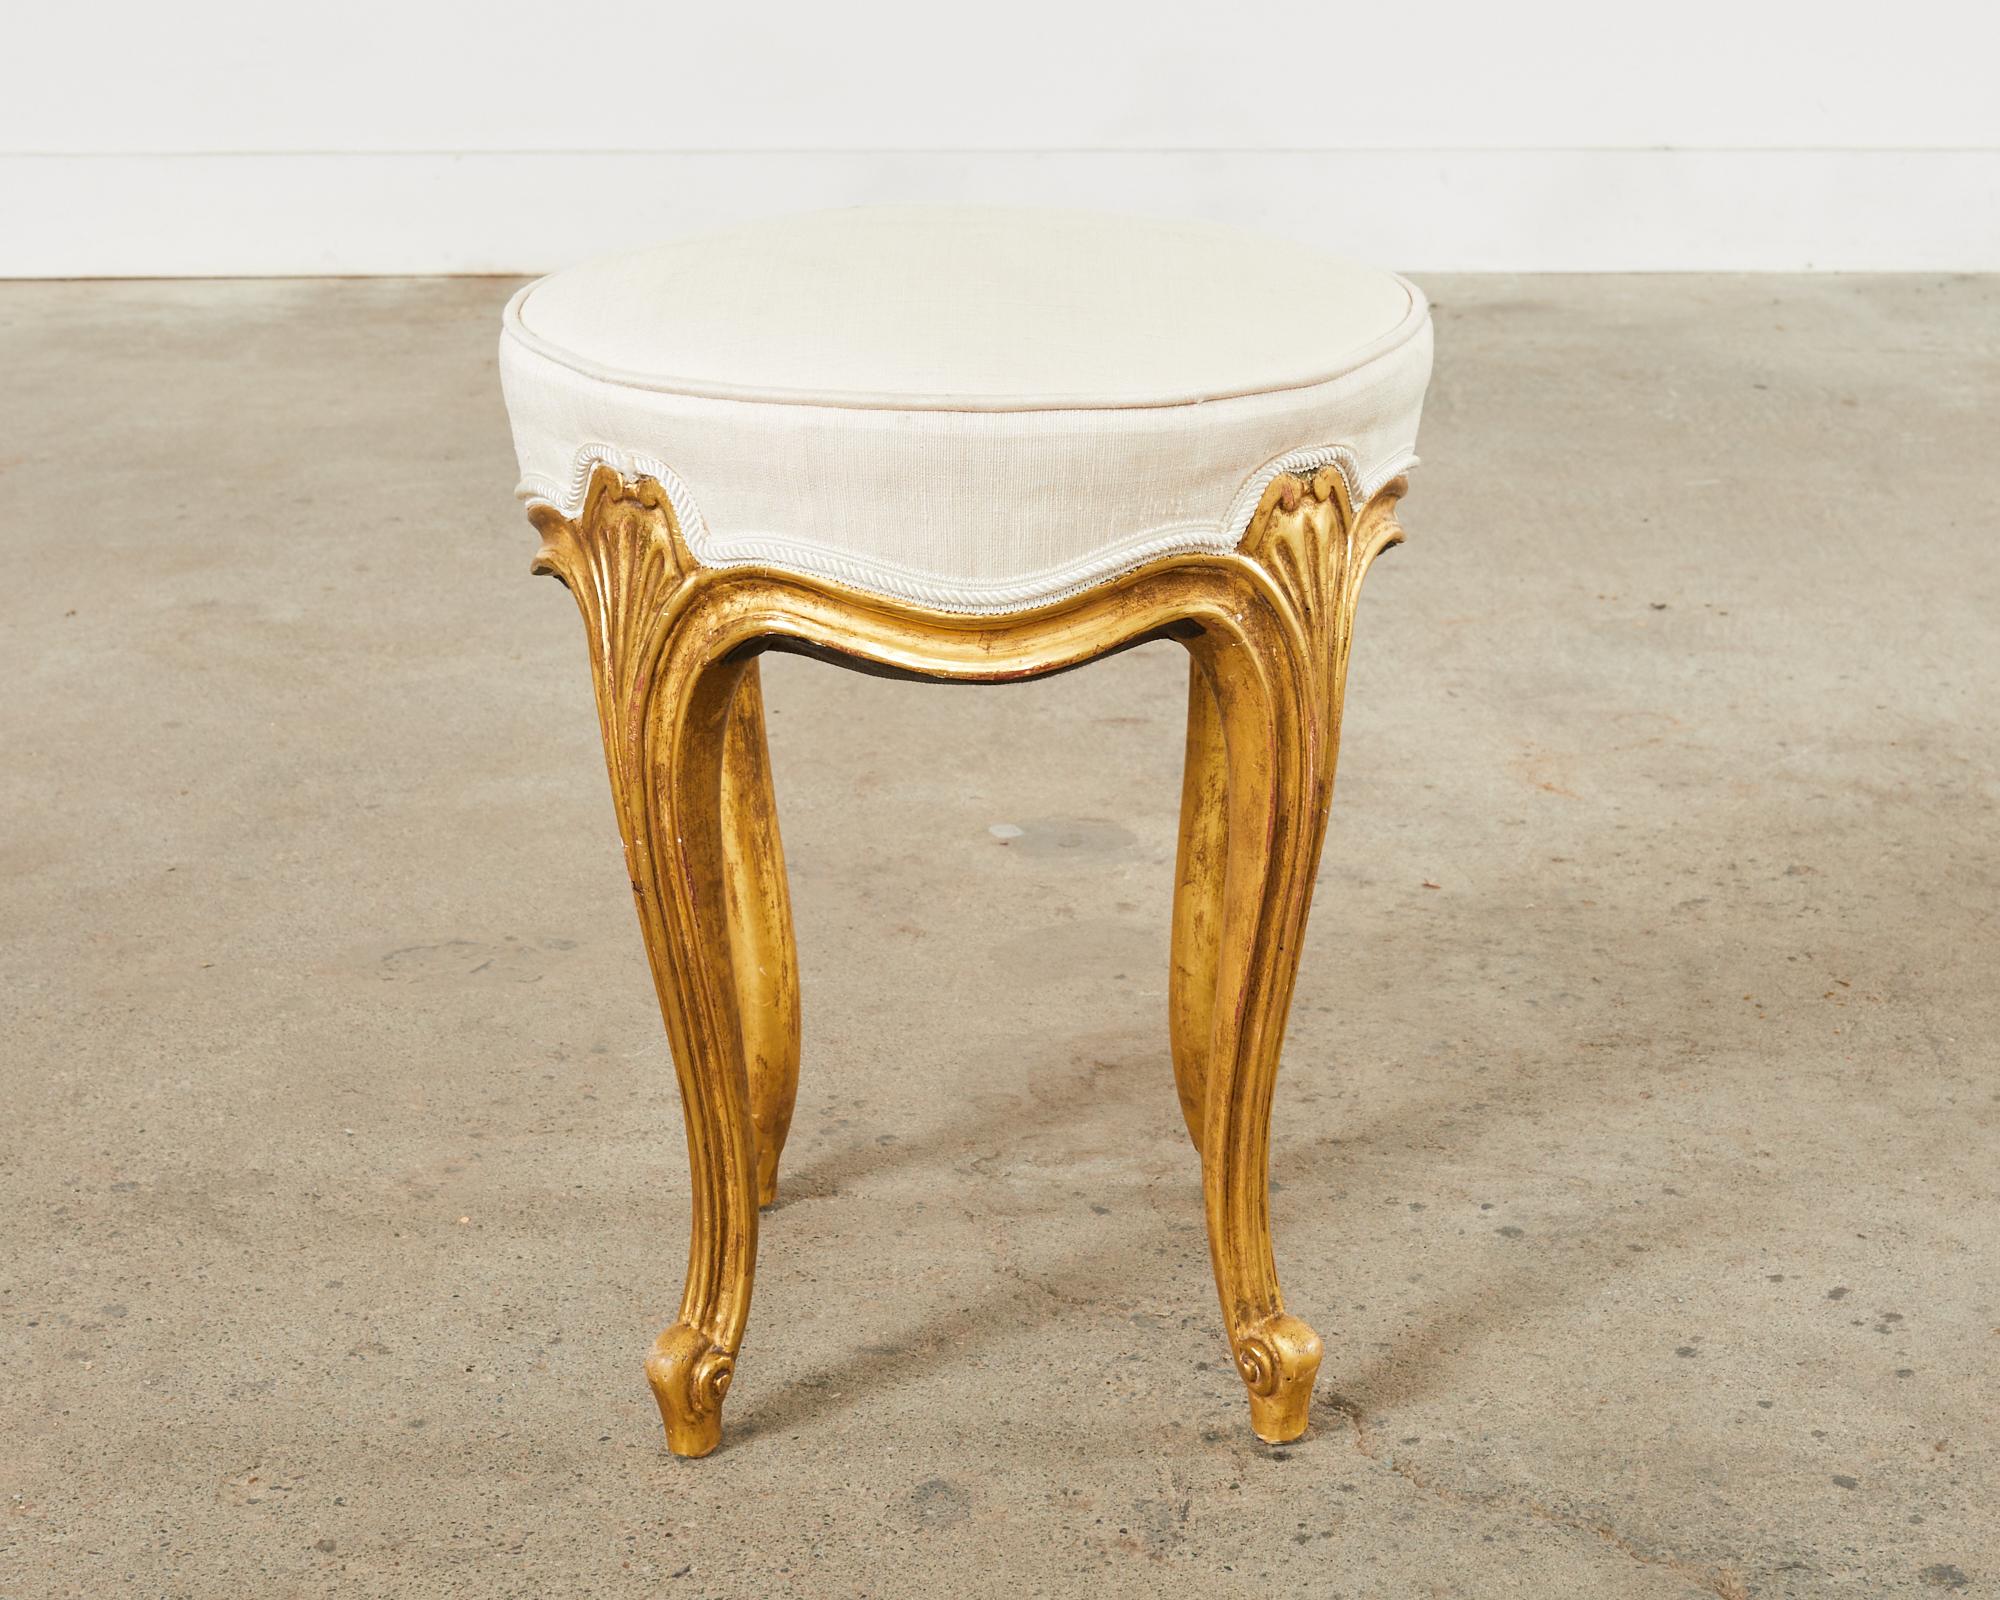 20th Century Rose Tarlow French Provincial Style Giltwood Carved Footstool For Sale